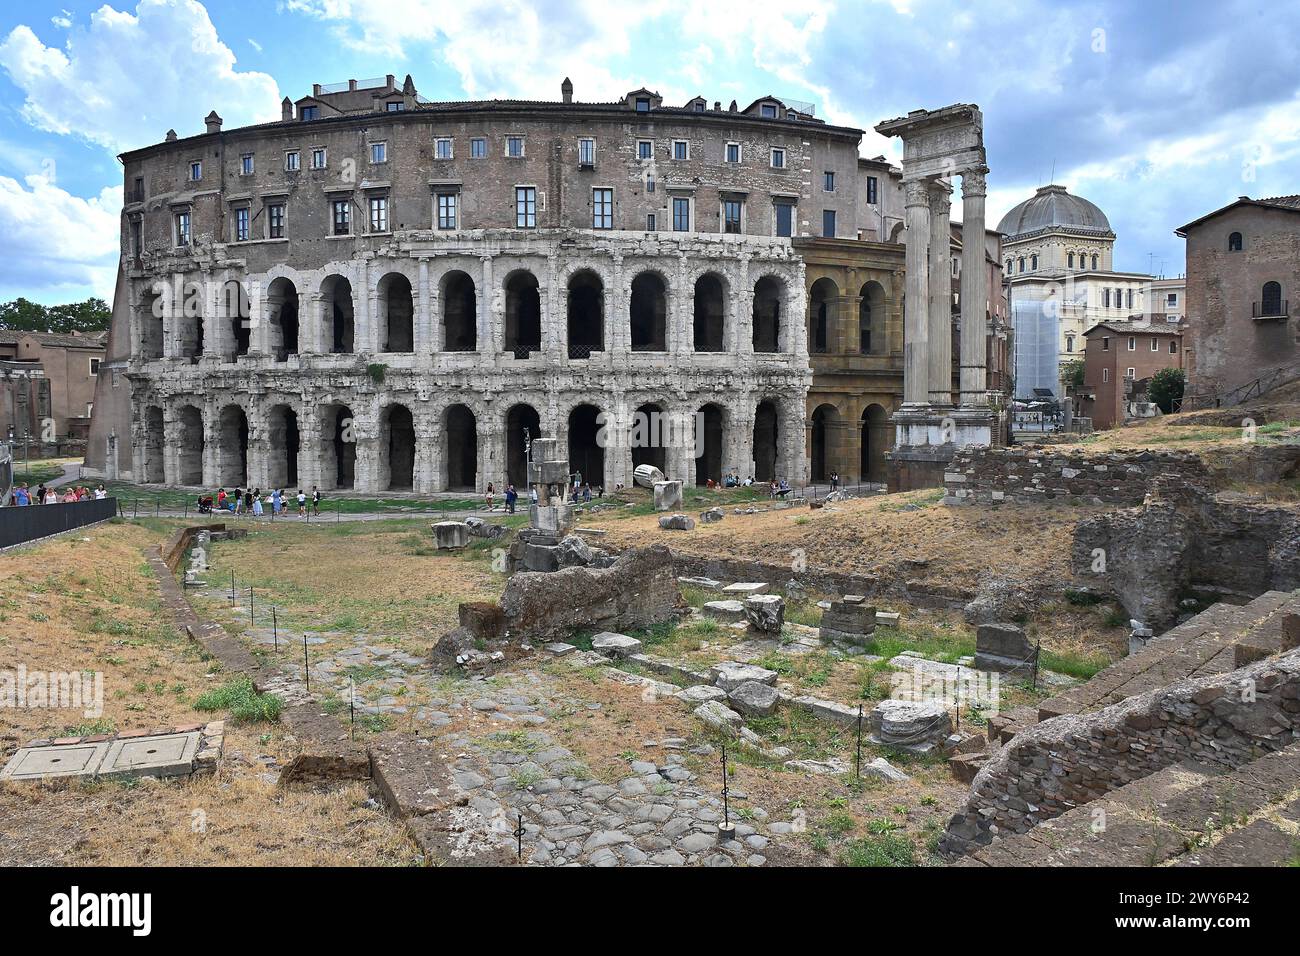 Italy, Rome: the Theater of Marcellus (Teatro di Marcello), an ancient open-air theatre completed in 13 BC and formally inaugurated in 12 BC by the Ro Stock Photo